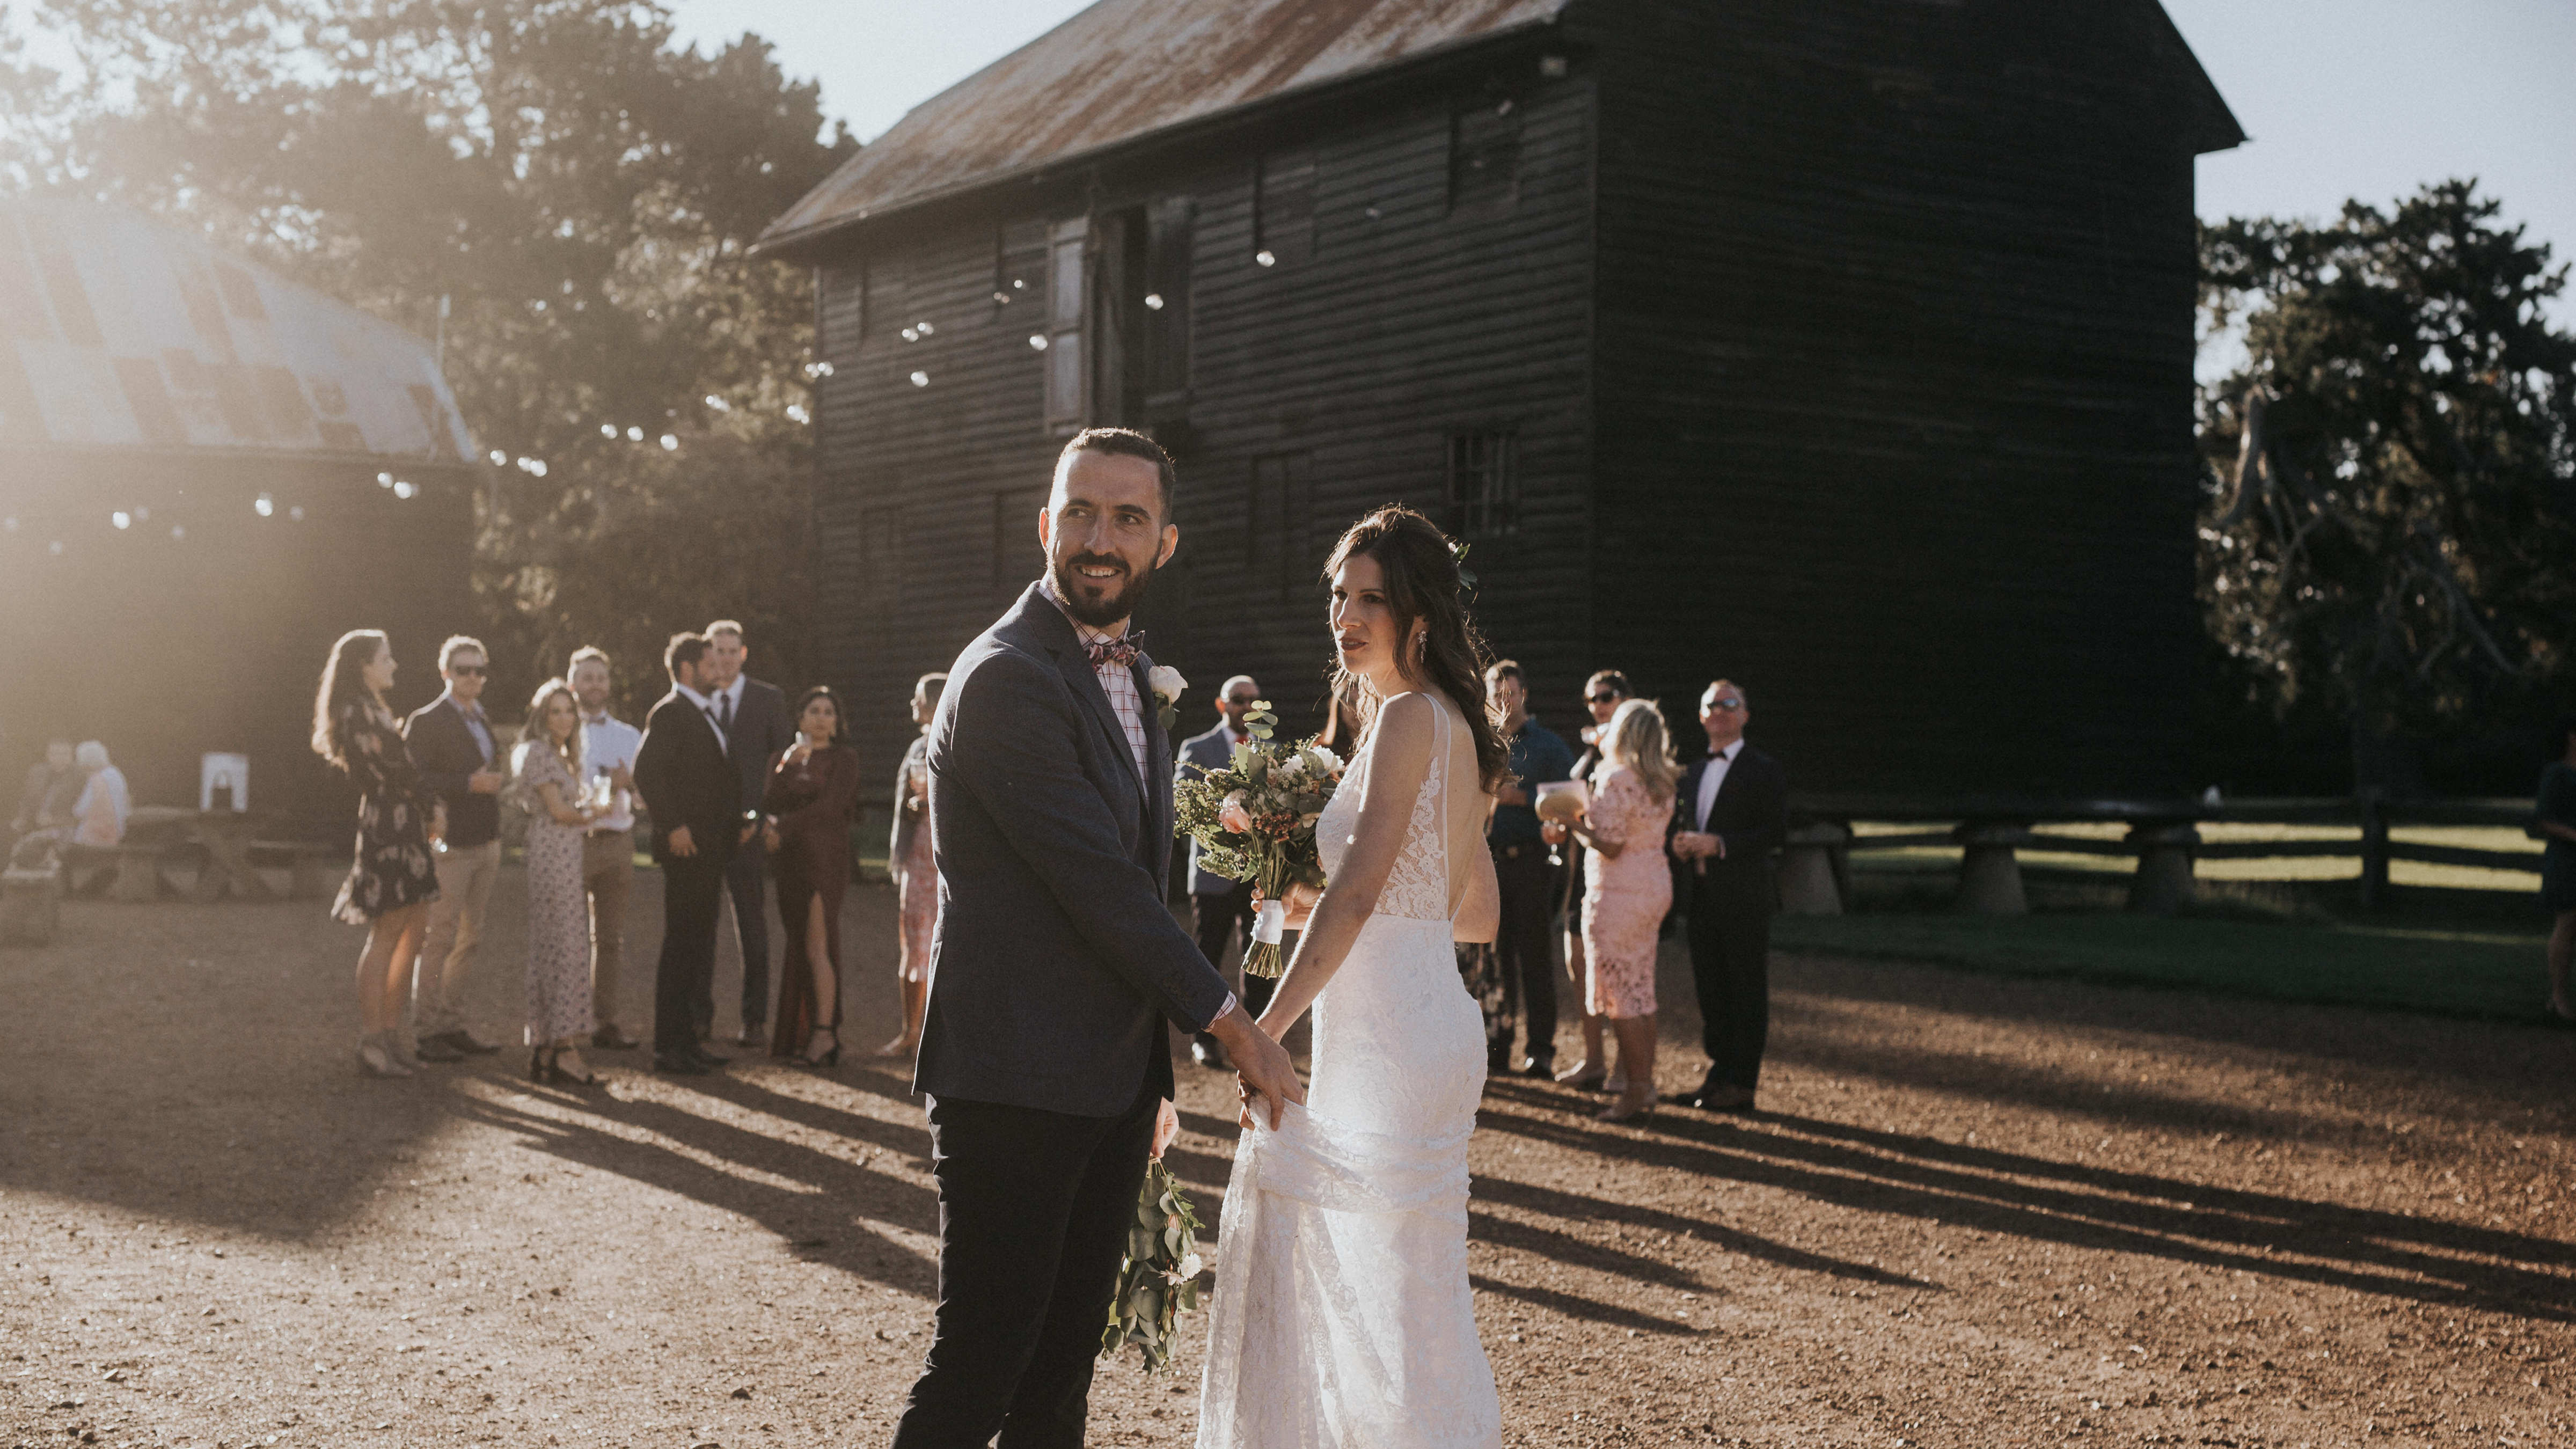 A bride and groom turn to look past the camera as guests mingle behind them in the quadrangle. The timber Pillar Granary stands behind the guests with festoon lights draped from it. Photo: Cassie Sullivan.